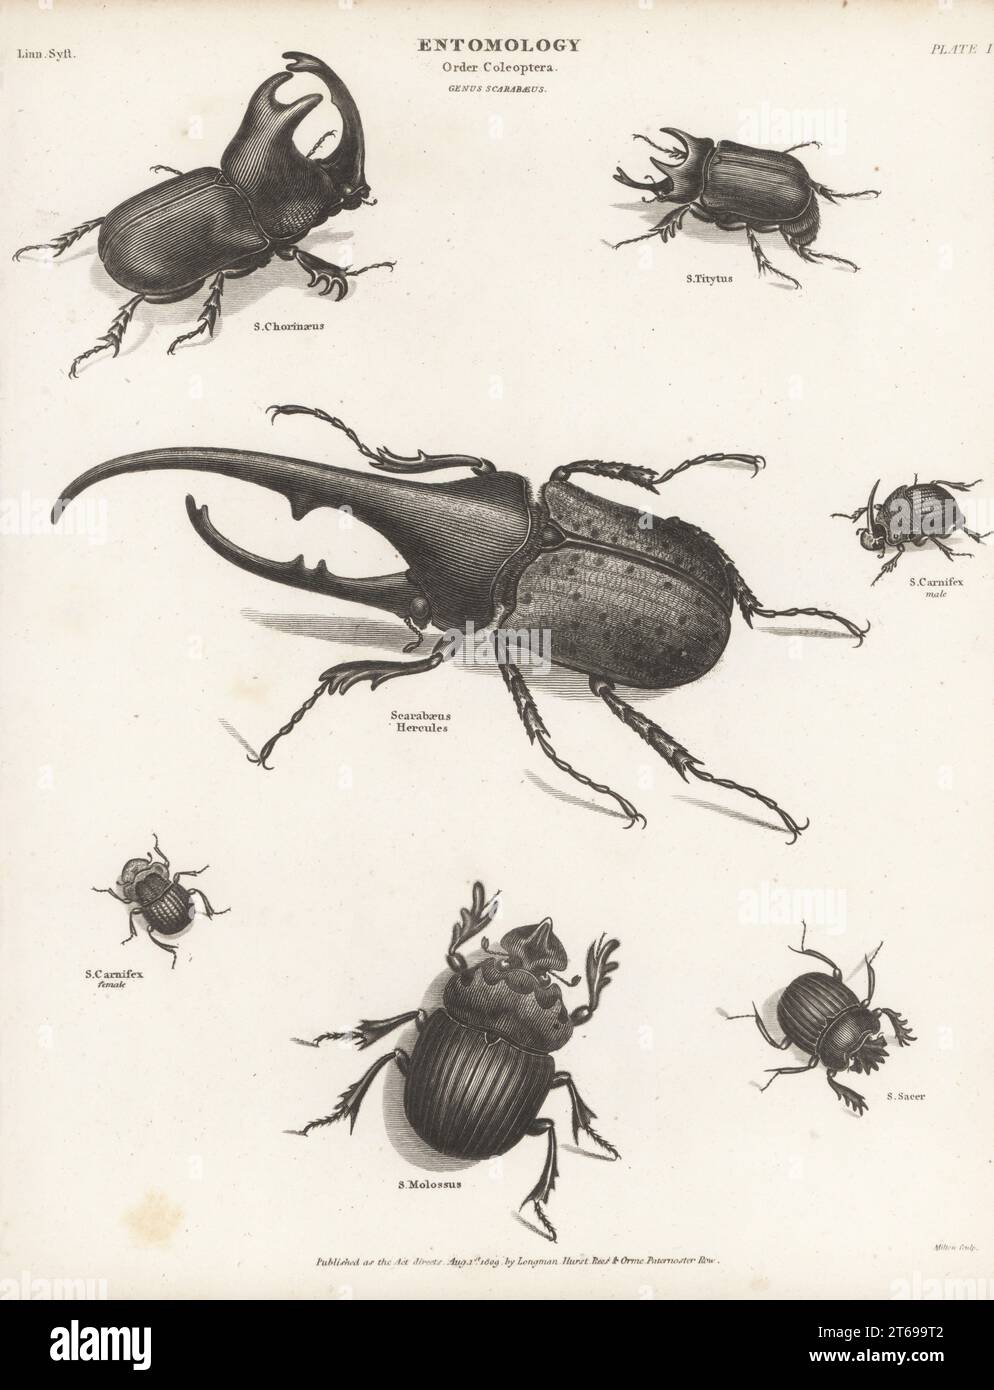 Hercules beetle, Dynastes hercules (Scarabeus hercules), rhinoceros beetle, Enema pan (S. chorinaeus), eastern hercules beetle, Dynastes tityus (S. titytus), rainbow scarab, male and female, Phanaeus vindex (S. carnifex), dung beetle, Catharsius molossus (S. molossus), and sacred scarab, Scarabaeus sacer. Copperplate engraving by Thomas Milton from Abraham Rees' Cyclopedia or Universal Dictionary of Arts, Sciences and Literature, Longman, Hurst, Rees, Orme, Paternoster Row, London, August 1, 1809. Stock Photo